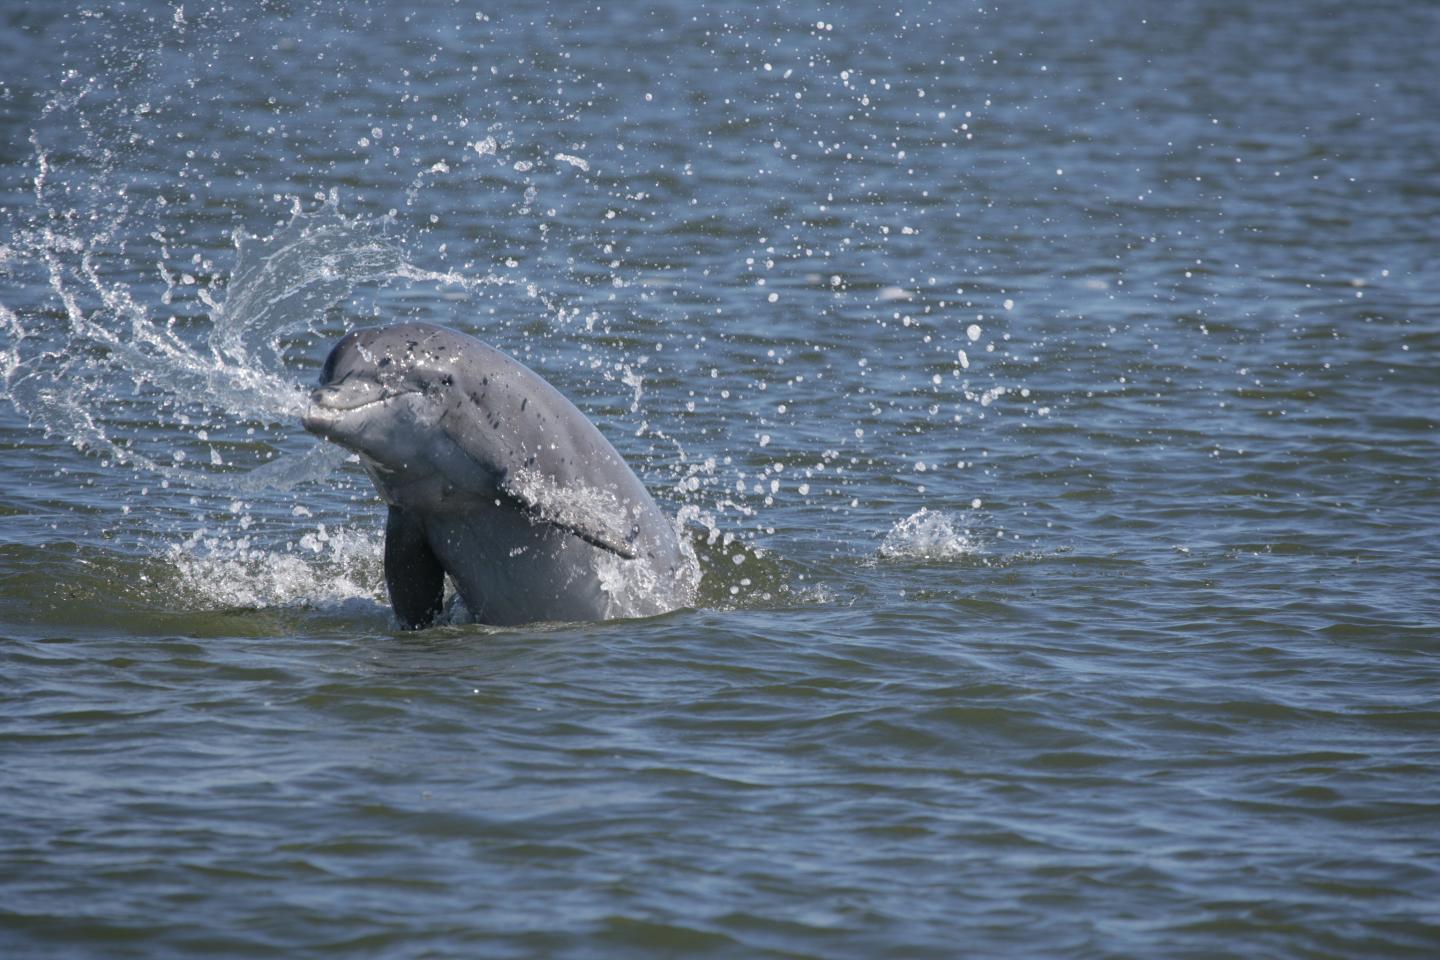 Dolphins Frolic